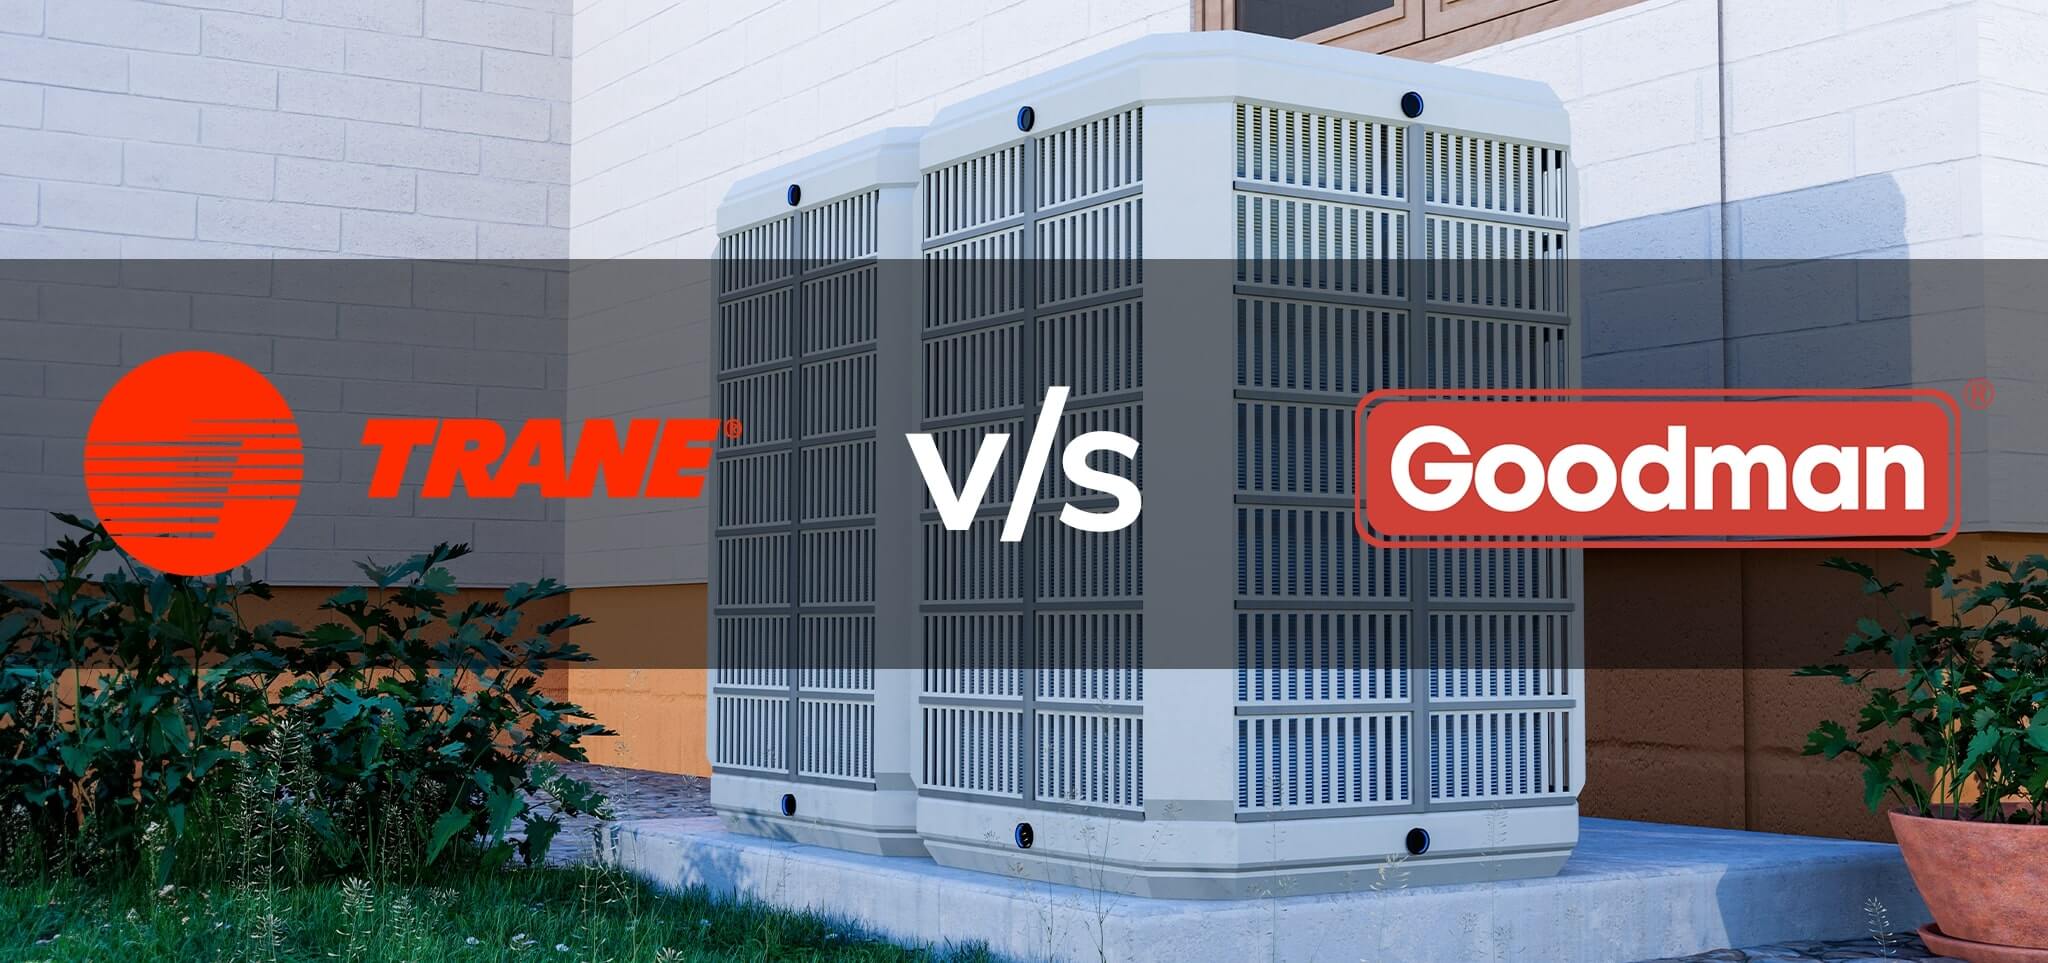 an image displaying the HVAC system and a comparison between Trans vs Goodman company